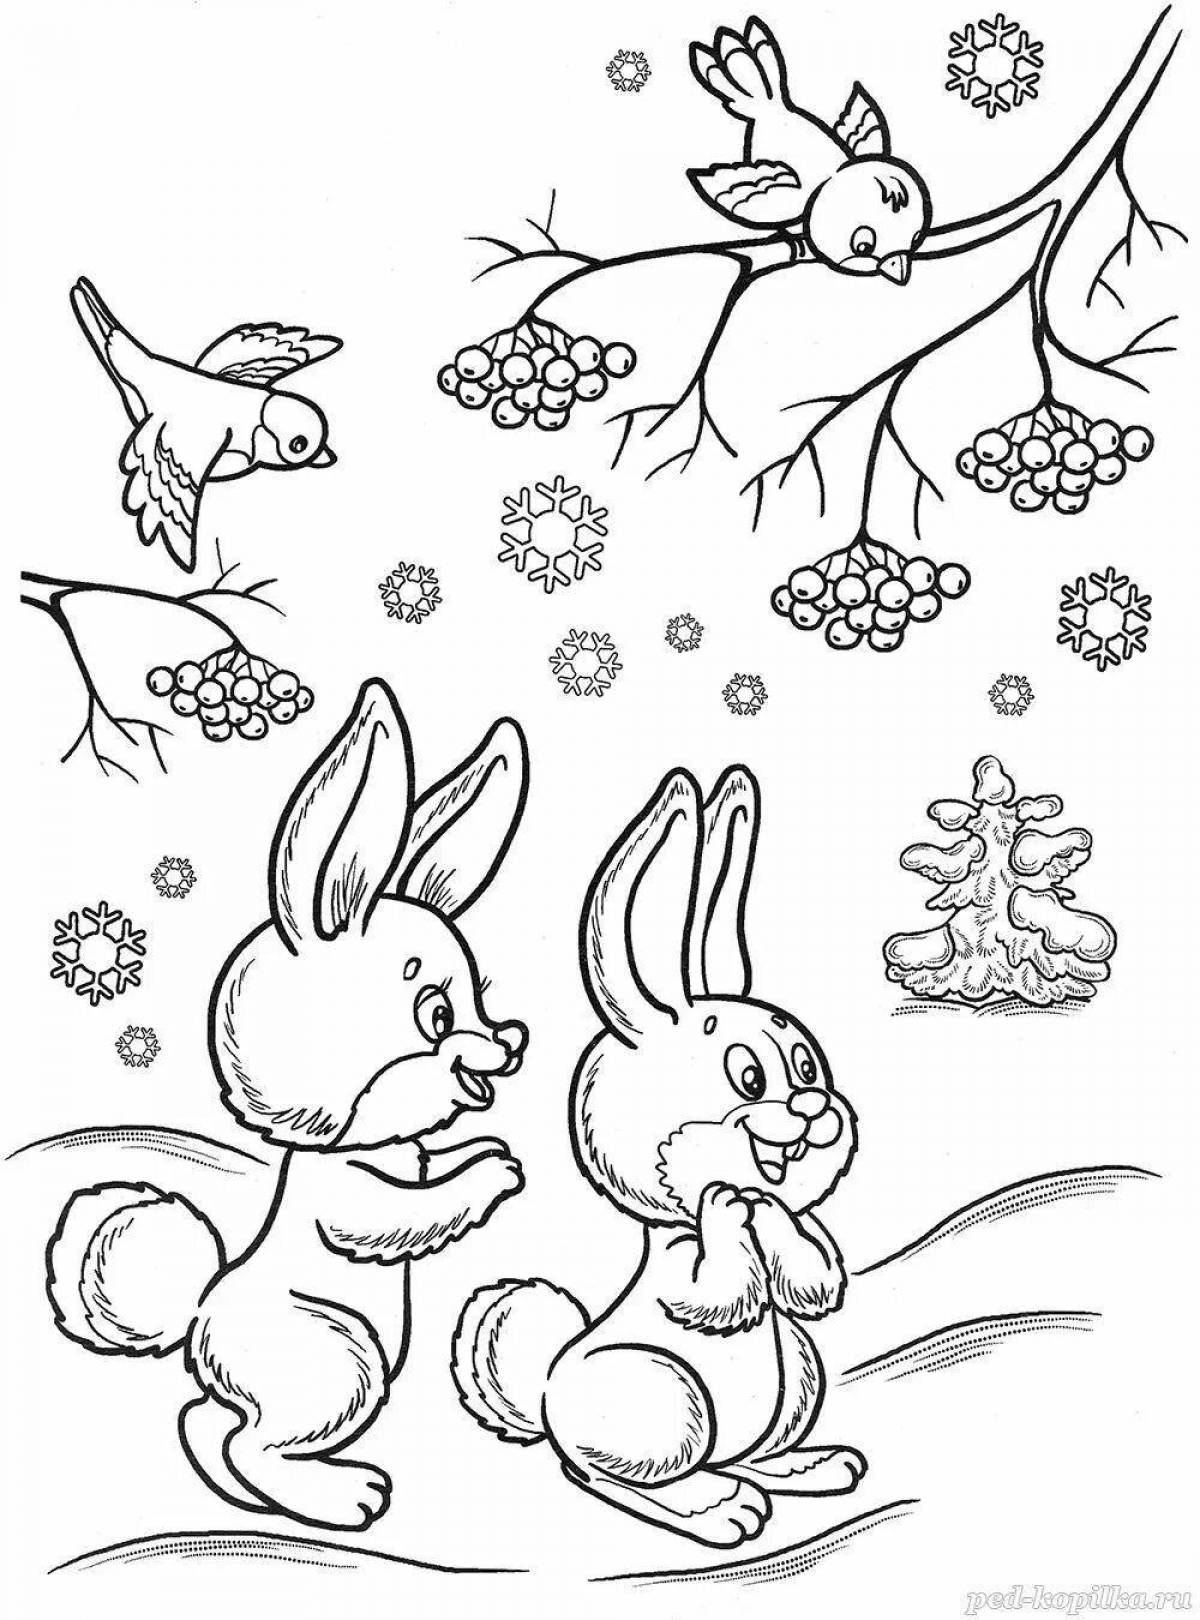 Chic bunny coloring book in winter